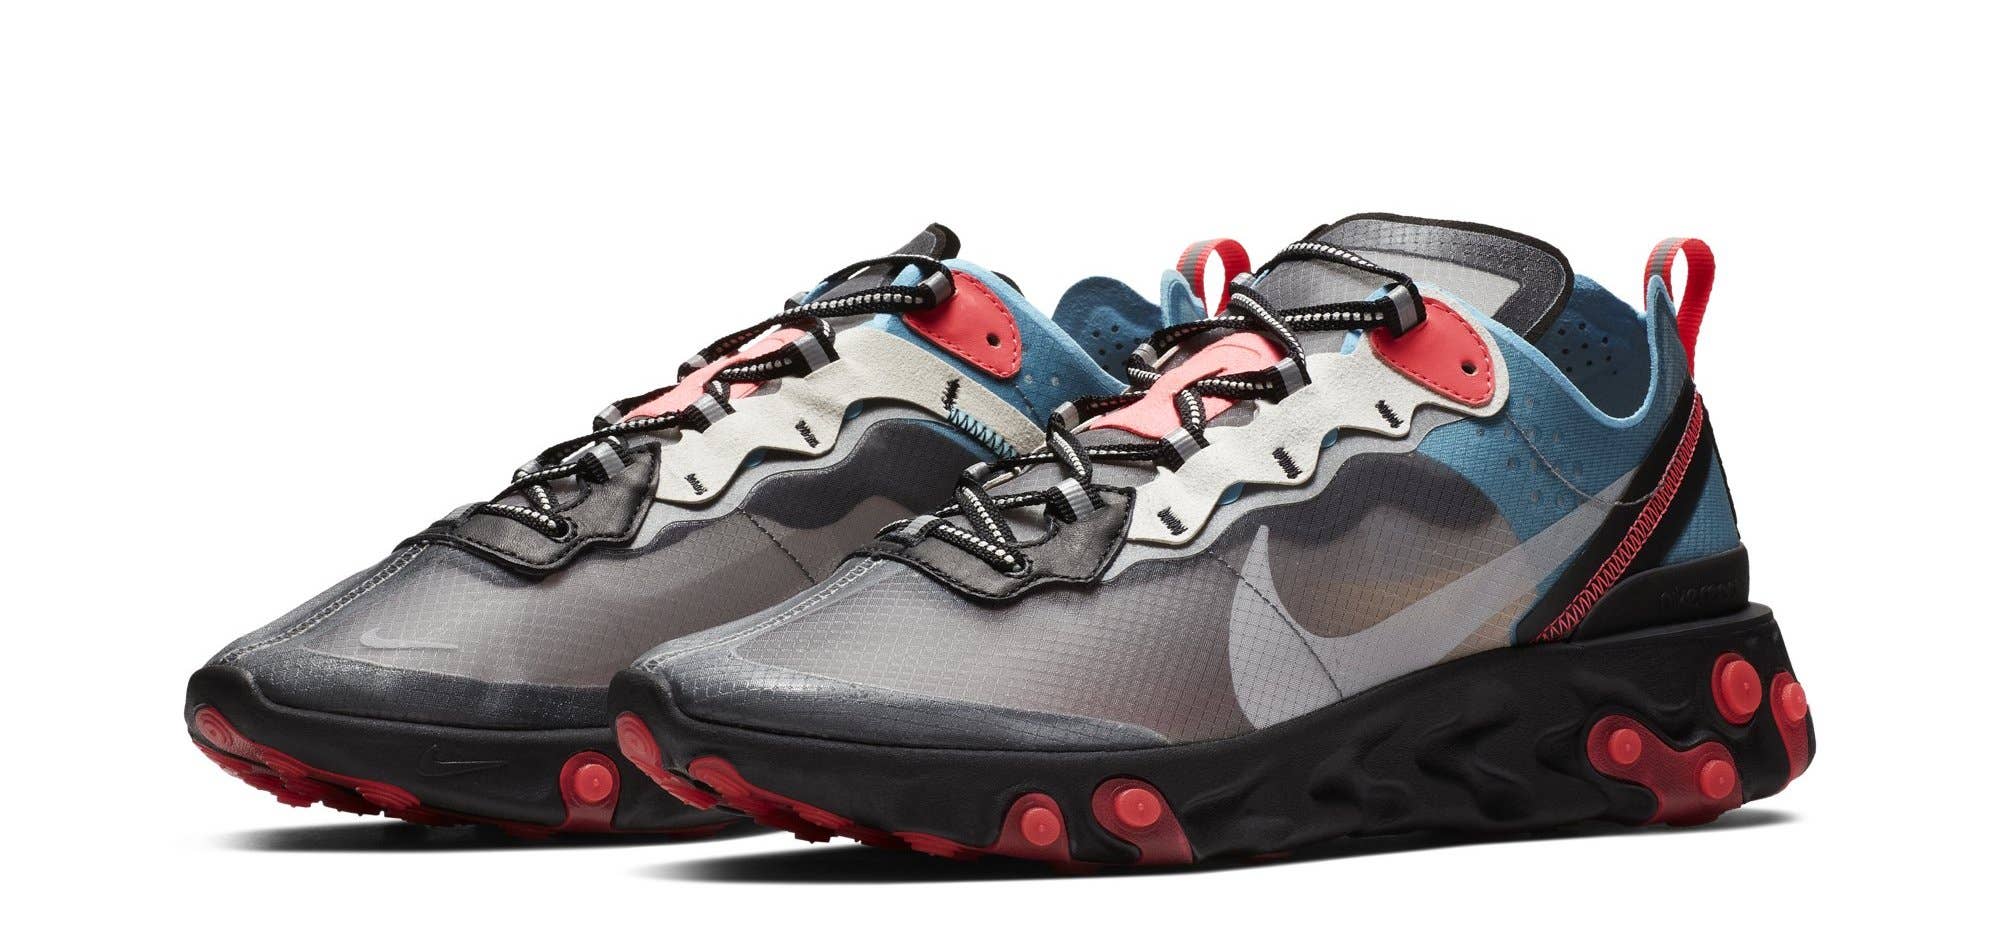 Fest snack Våd Alternative to Undercover React 87s Coming Soon | Complex